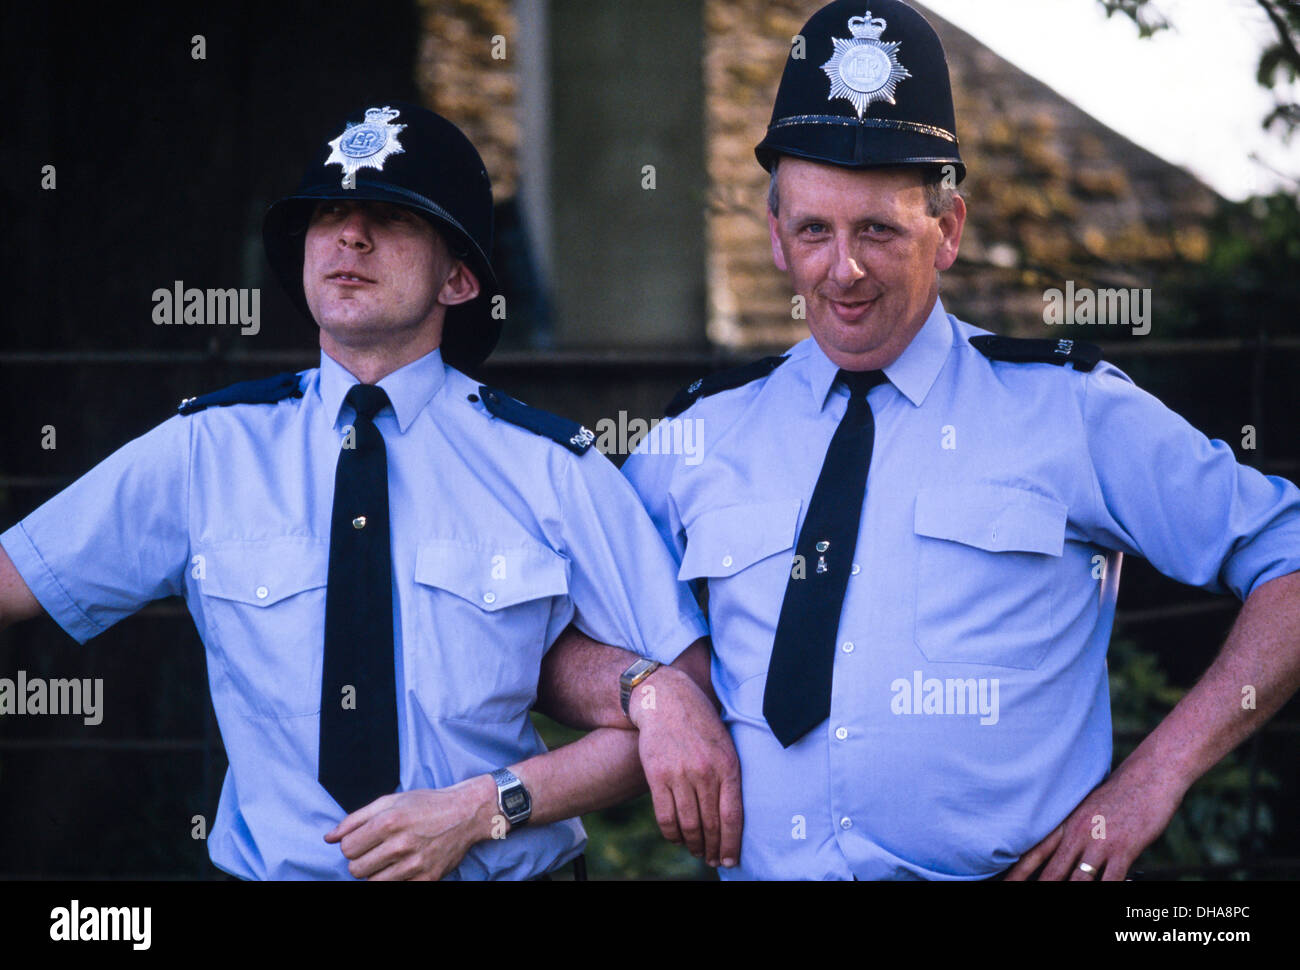 Two male police constables posing for a laugh with the wrong size custodian helmets. England, UK. Circa 1980's Stock Photo